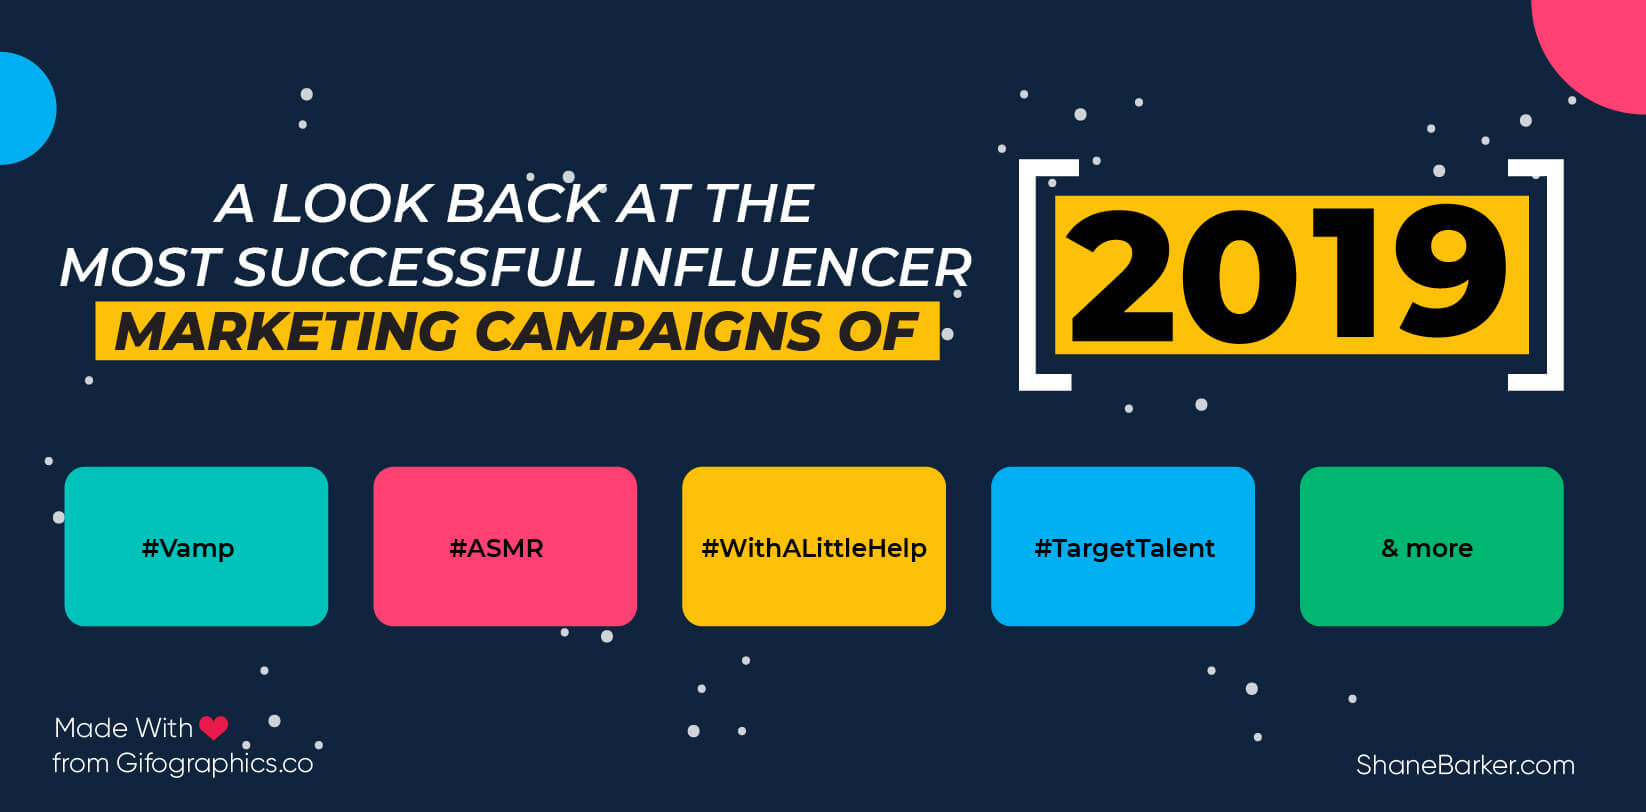 A Look Back at the Most Successful Influencer Marketing Campaigns of 2019